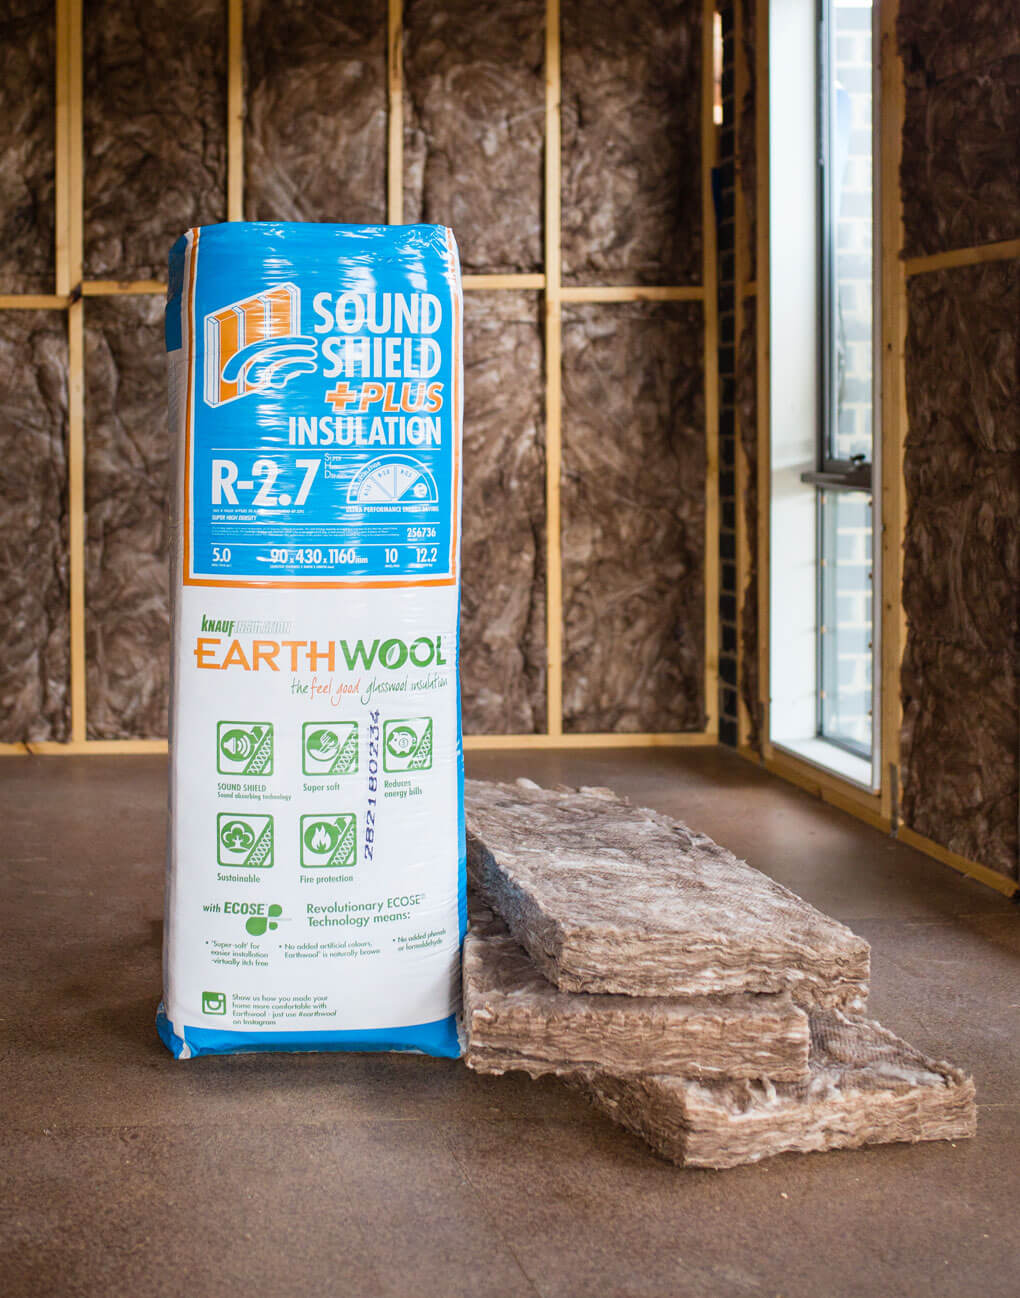 Buy Knauf Earthwool Sound Shield Insulation Online - Acoustic Insulation